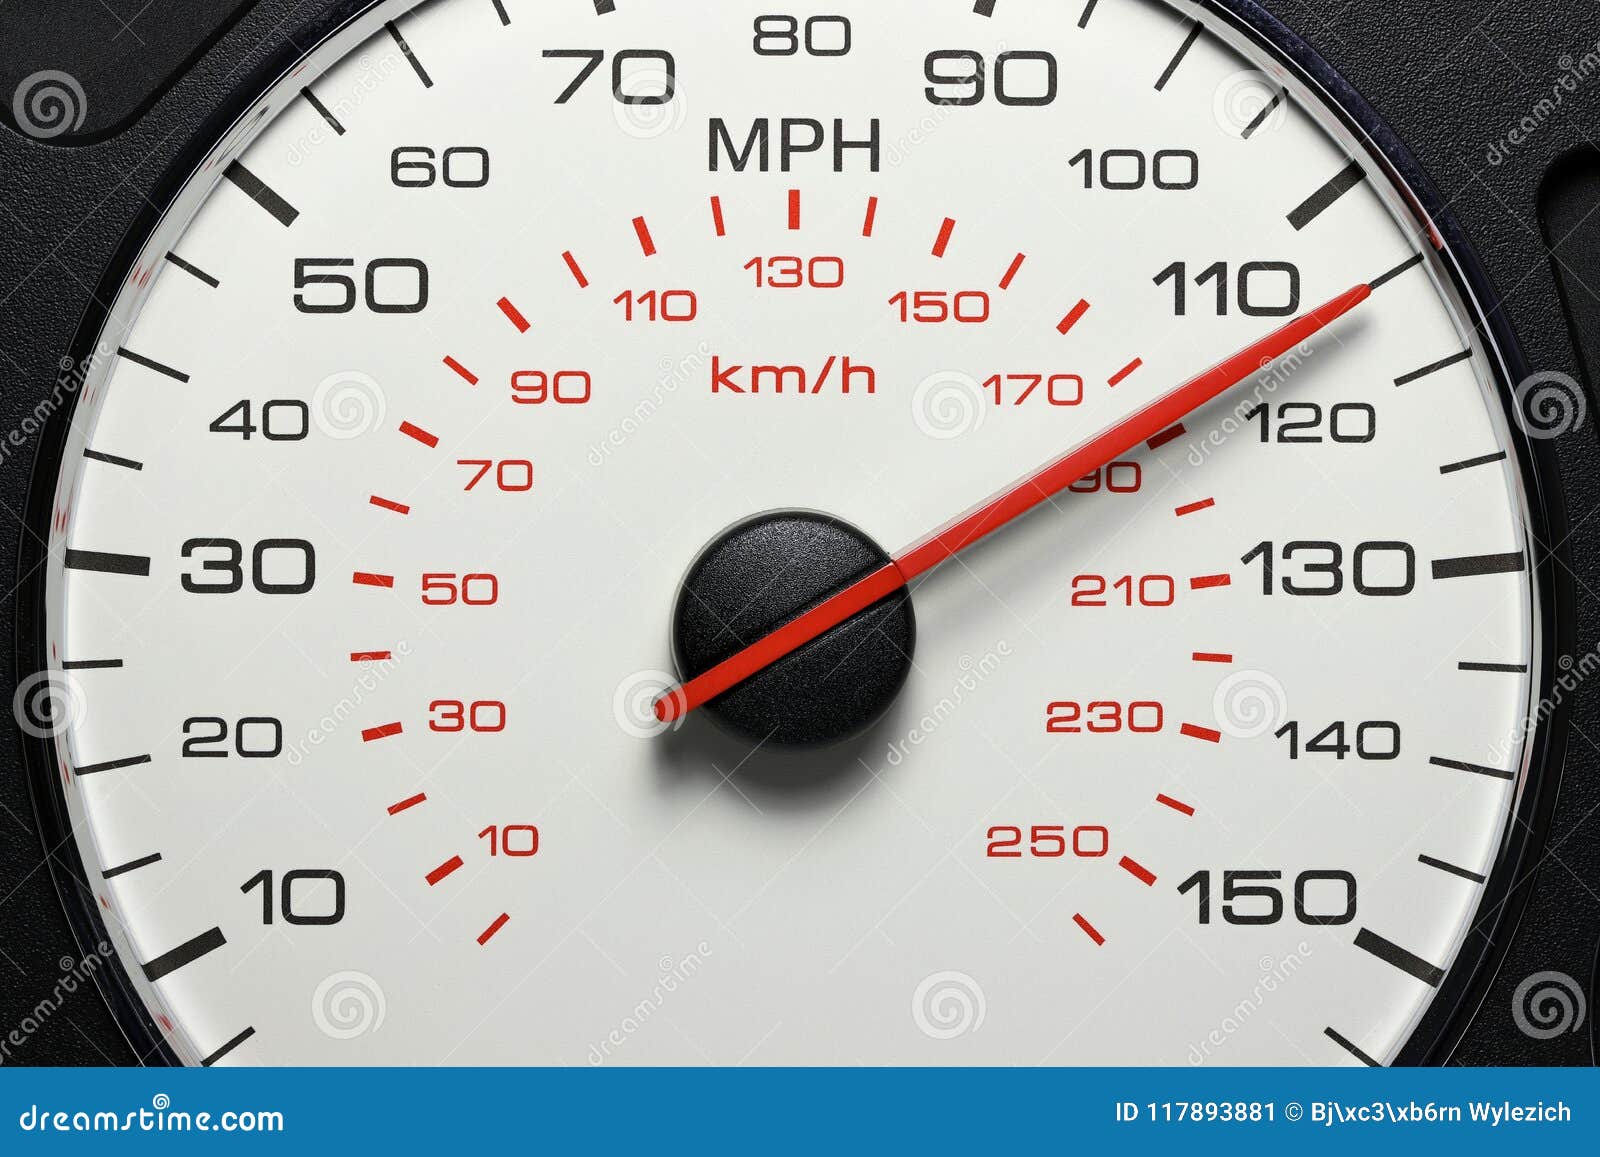 115 kmh to mph